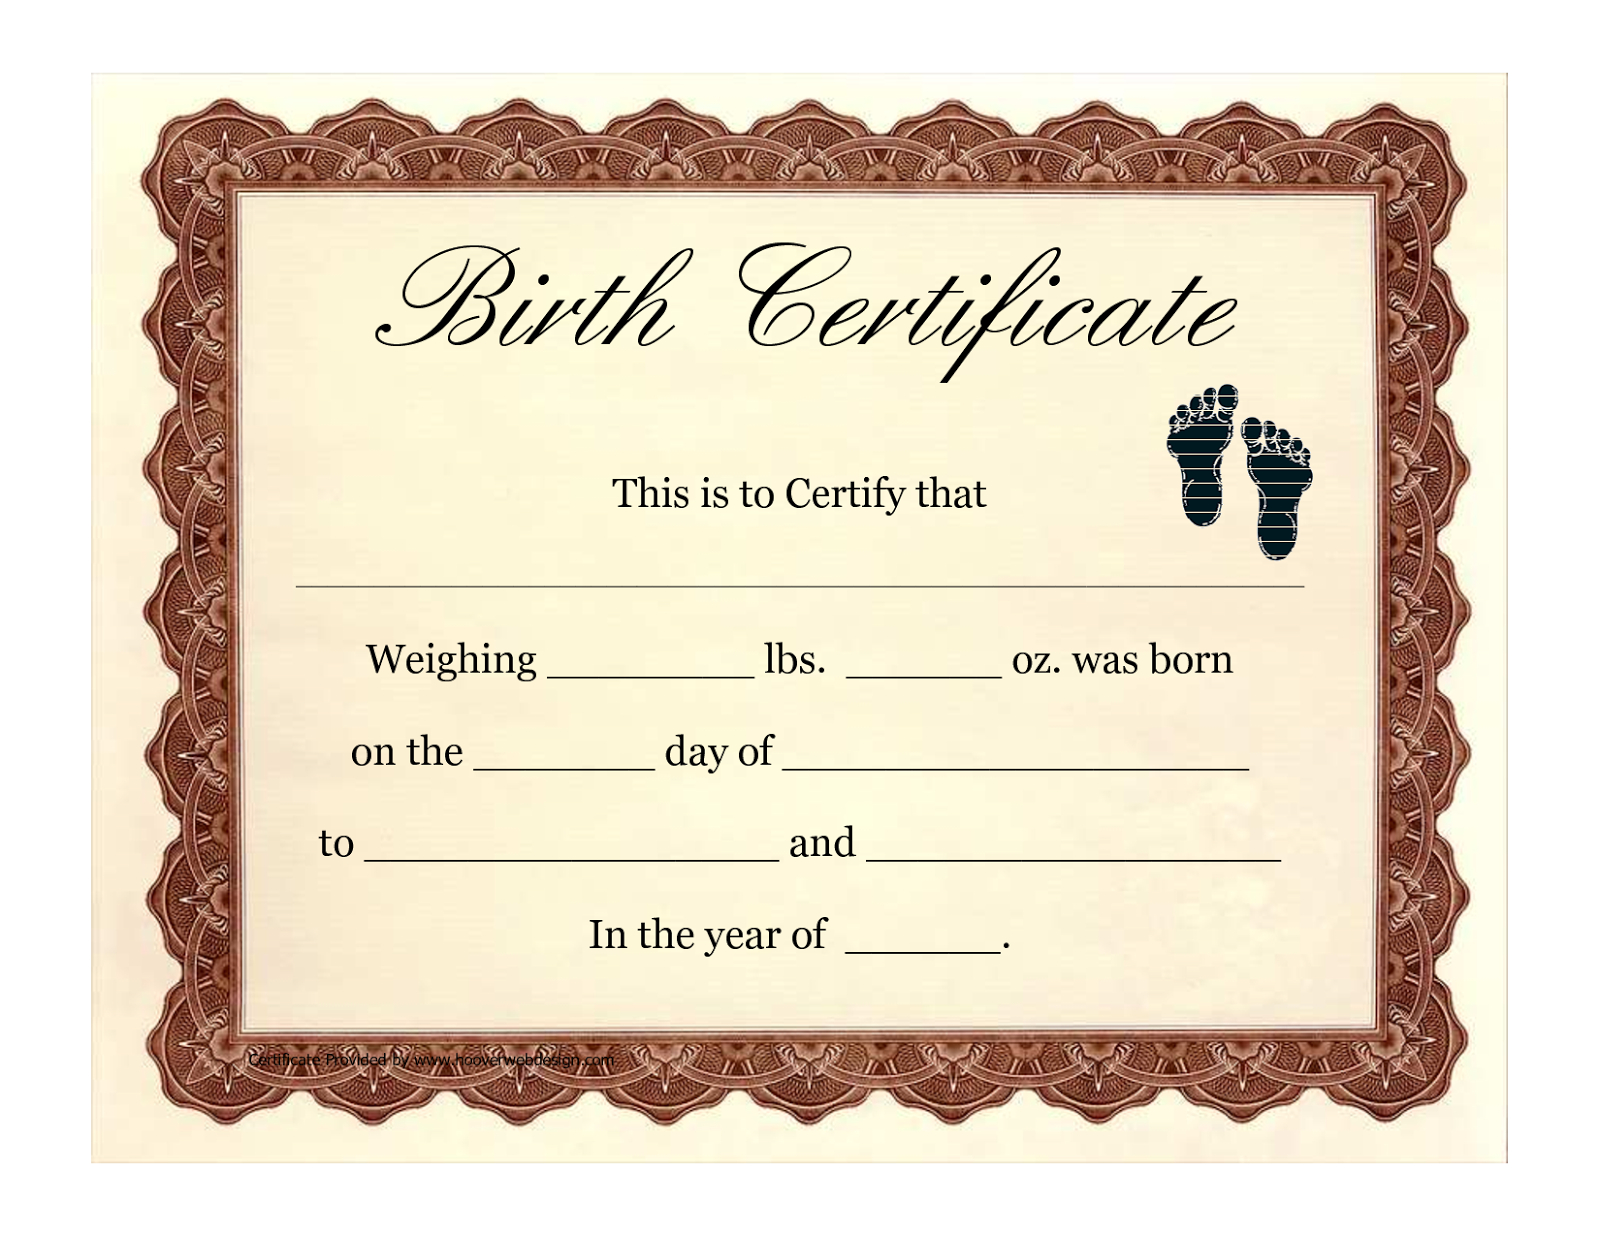 Attest Your Birth Certificate In Ahmedabad, Pune Intended For Girl Birth Certificate Template